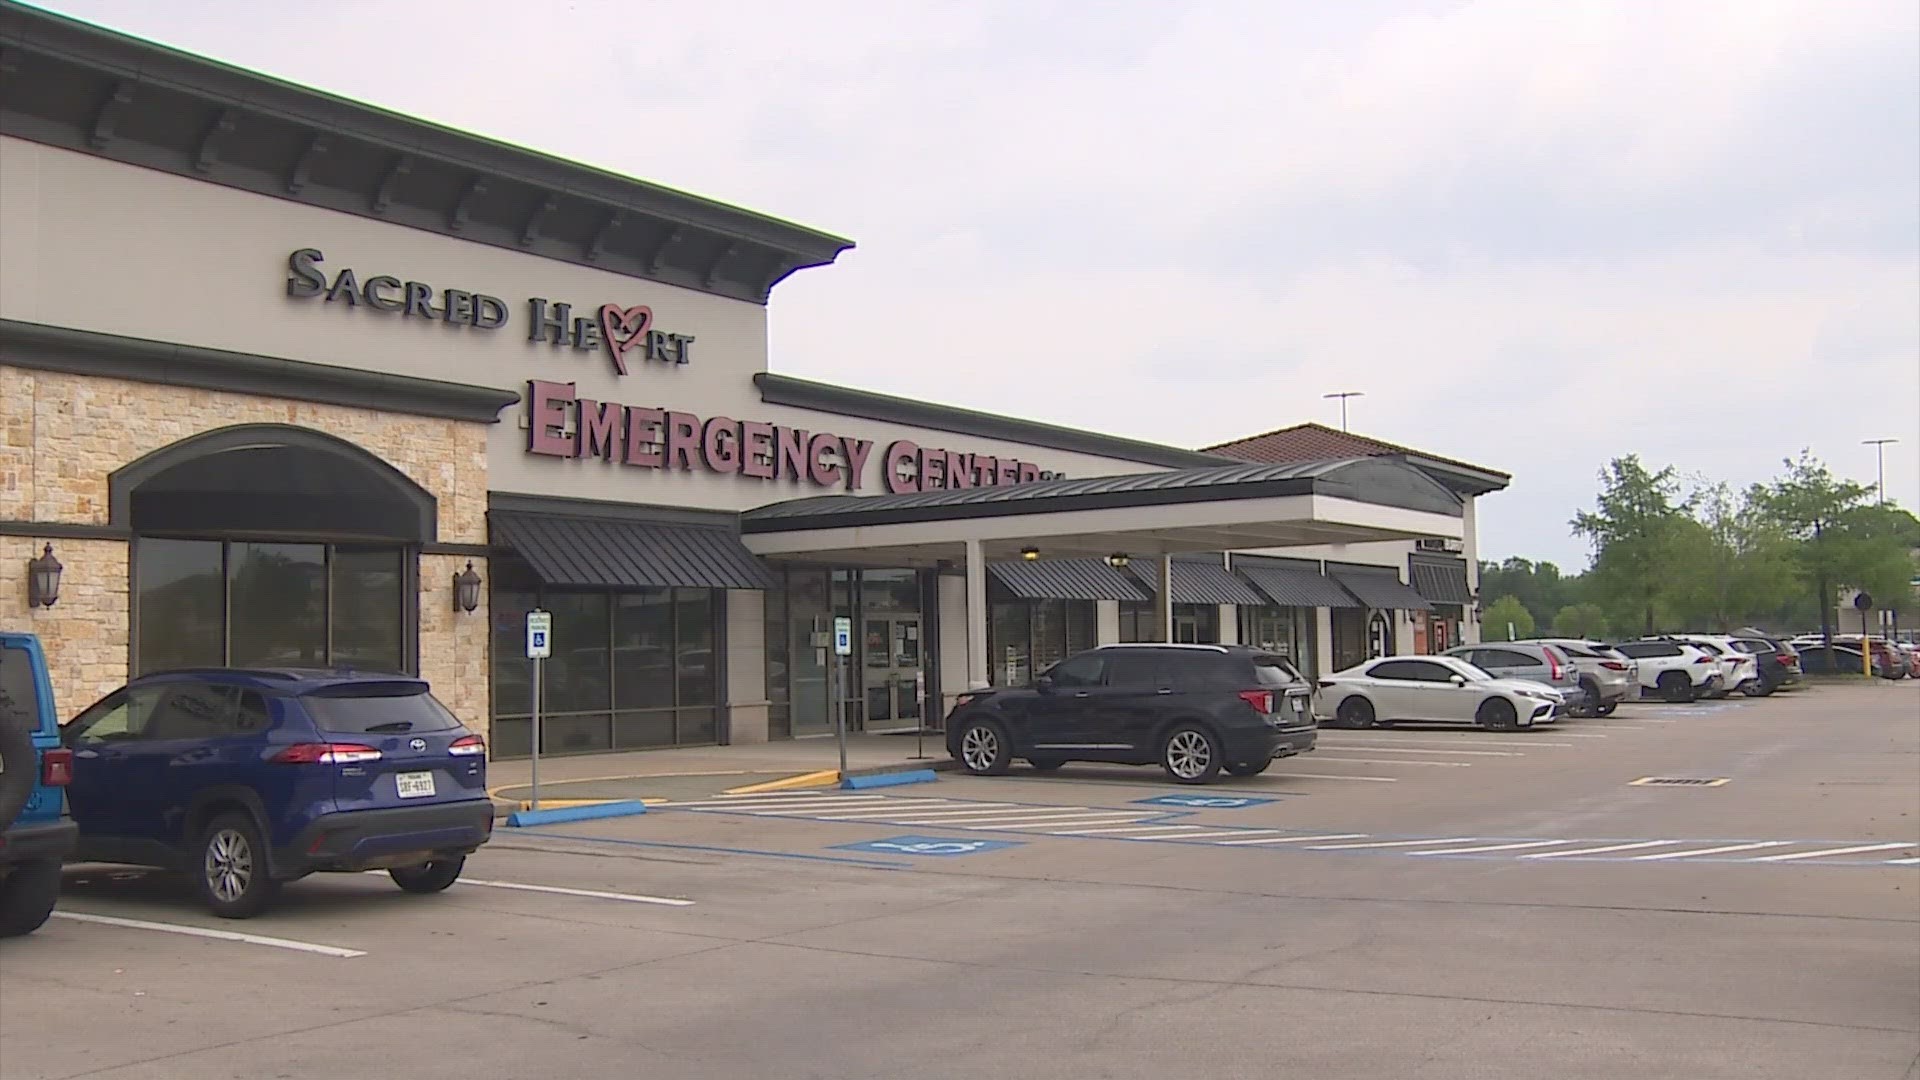 At Sacred Heart Emergency Center in Houston, front desk staff refused to check in one woman after her husband asked for help delivering her baby that September.